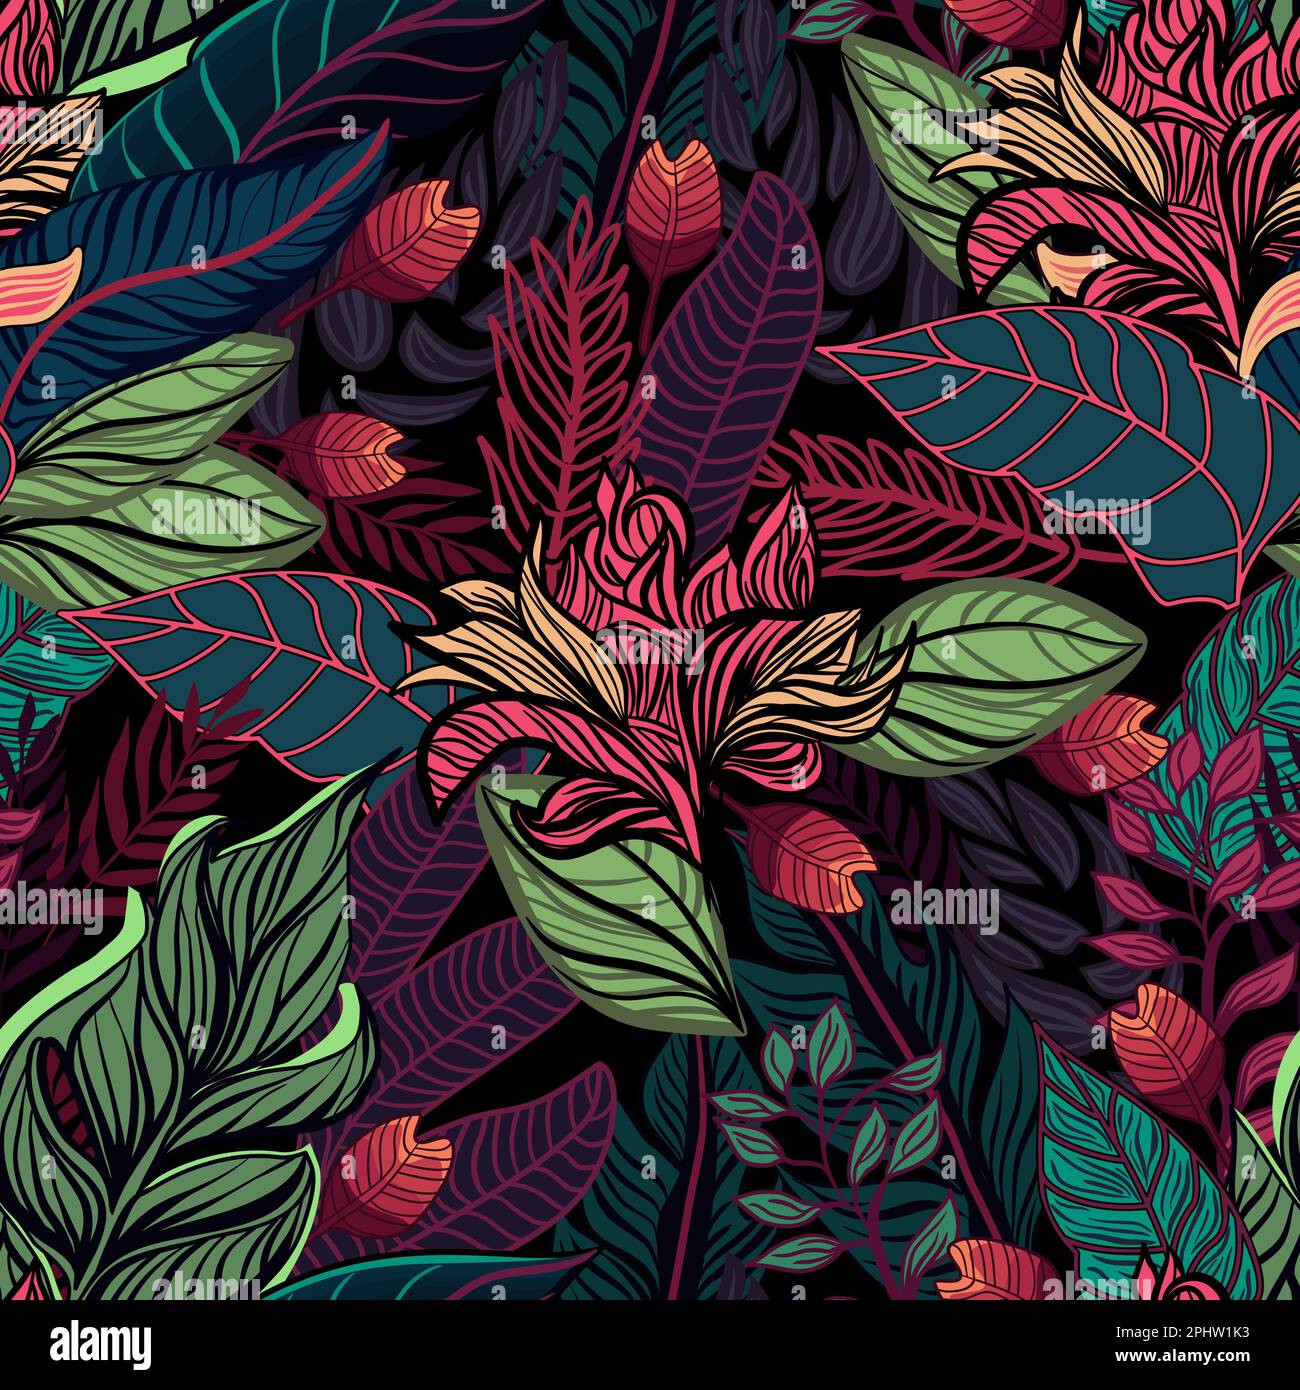 Seamless tropical pattern with rainforest plants and flowers vector illustration in vintage style Stock Vector